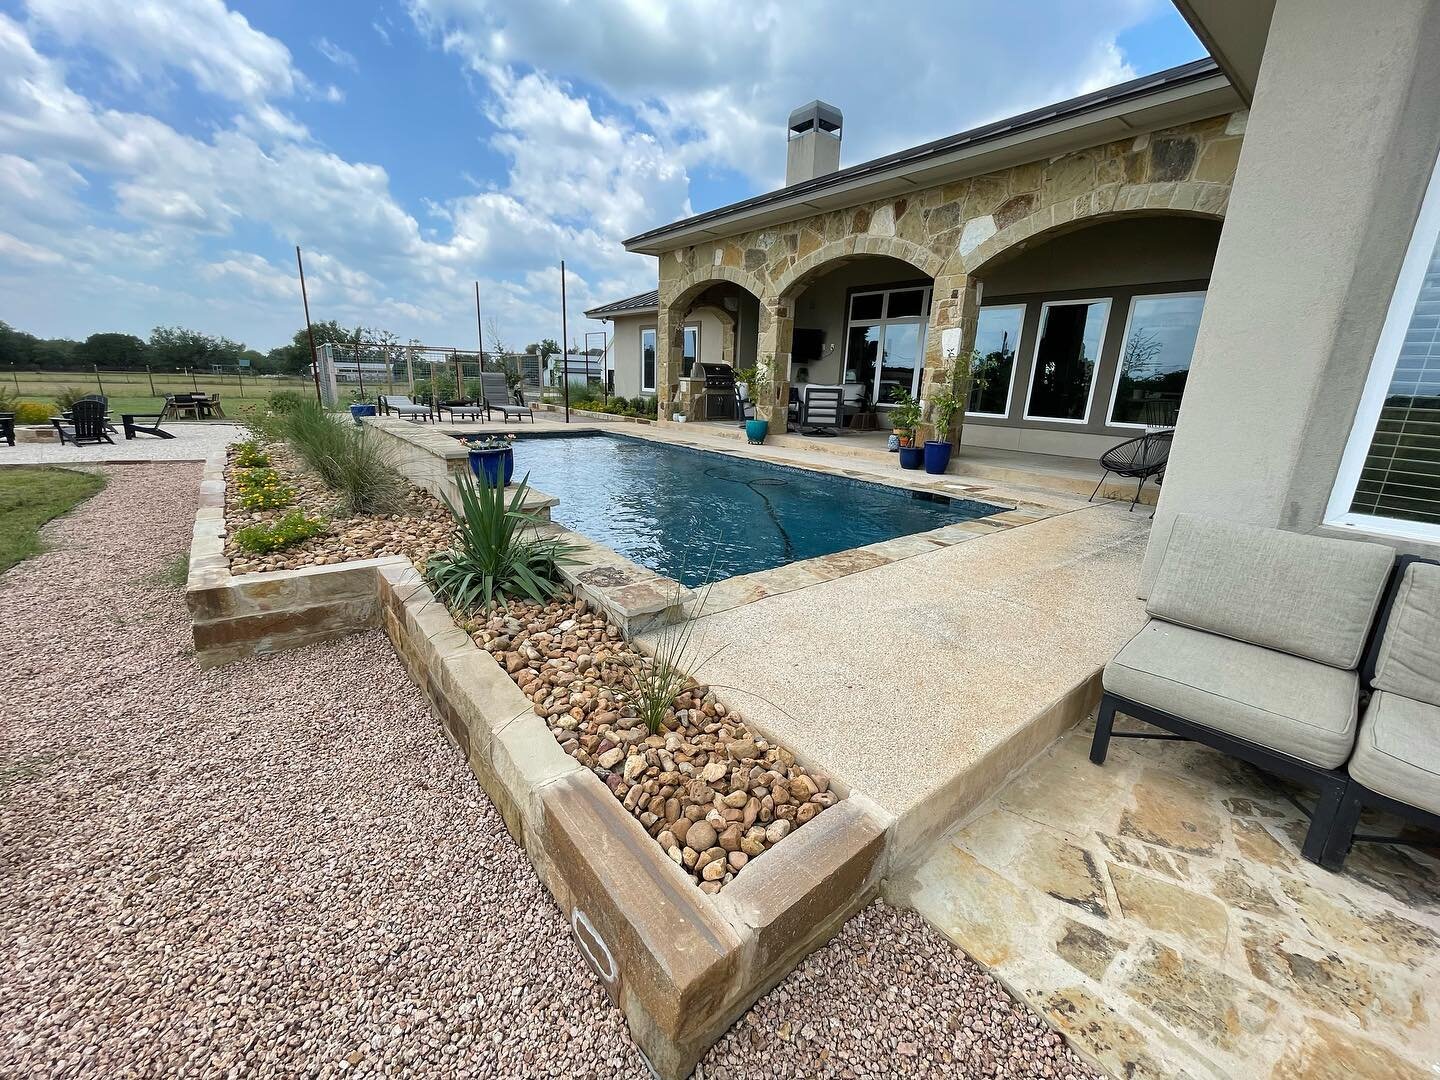 Swipe to the end to see &ldquo;before&rdquo; photos 

#texashillcounty #outdoorliving #landscape #landscapedesign #rock #firepit #trellis